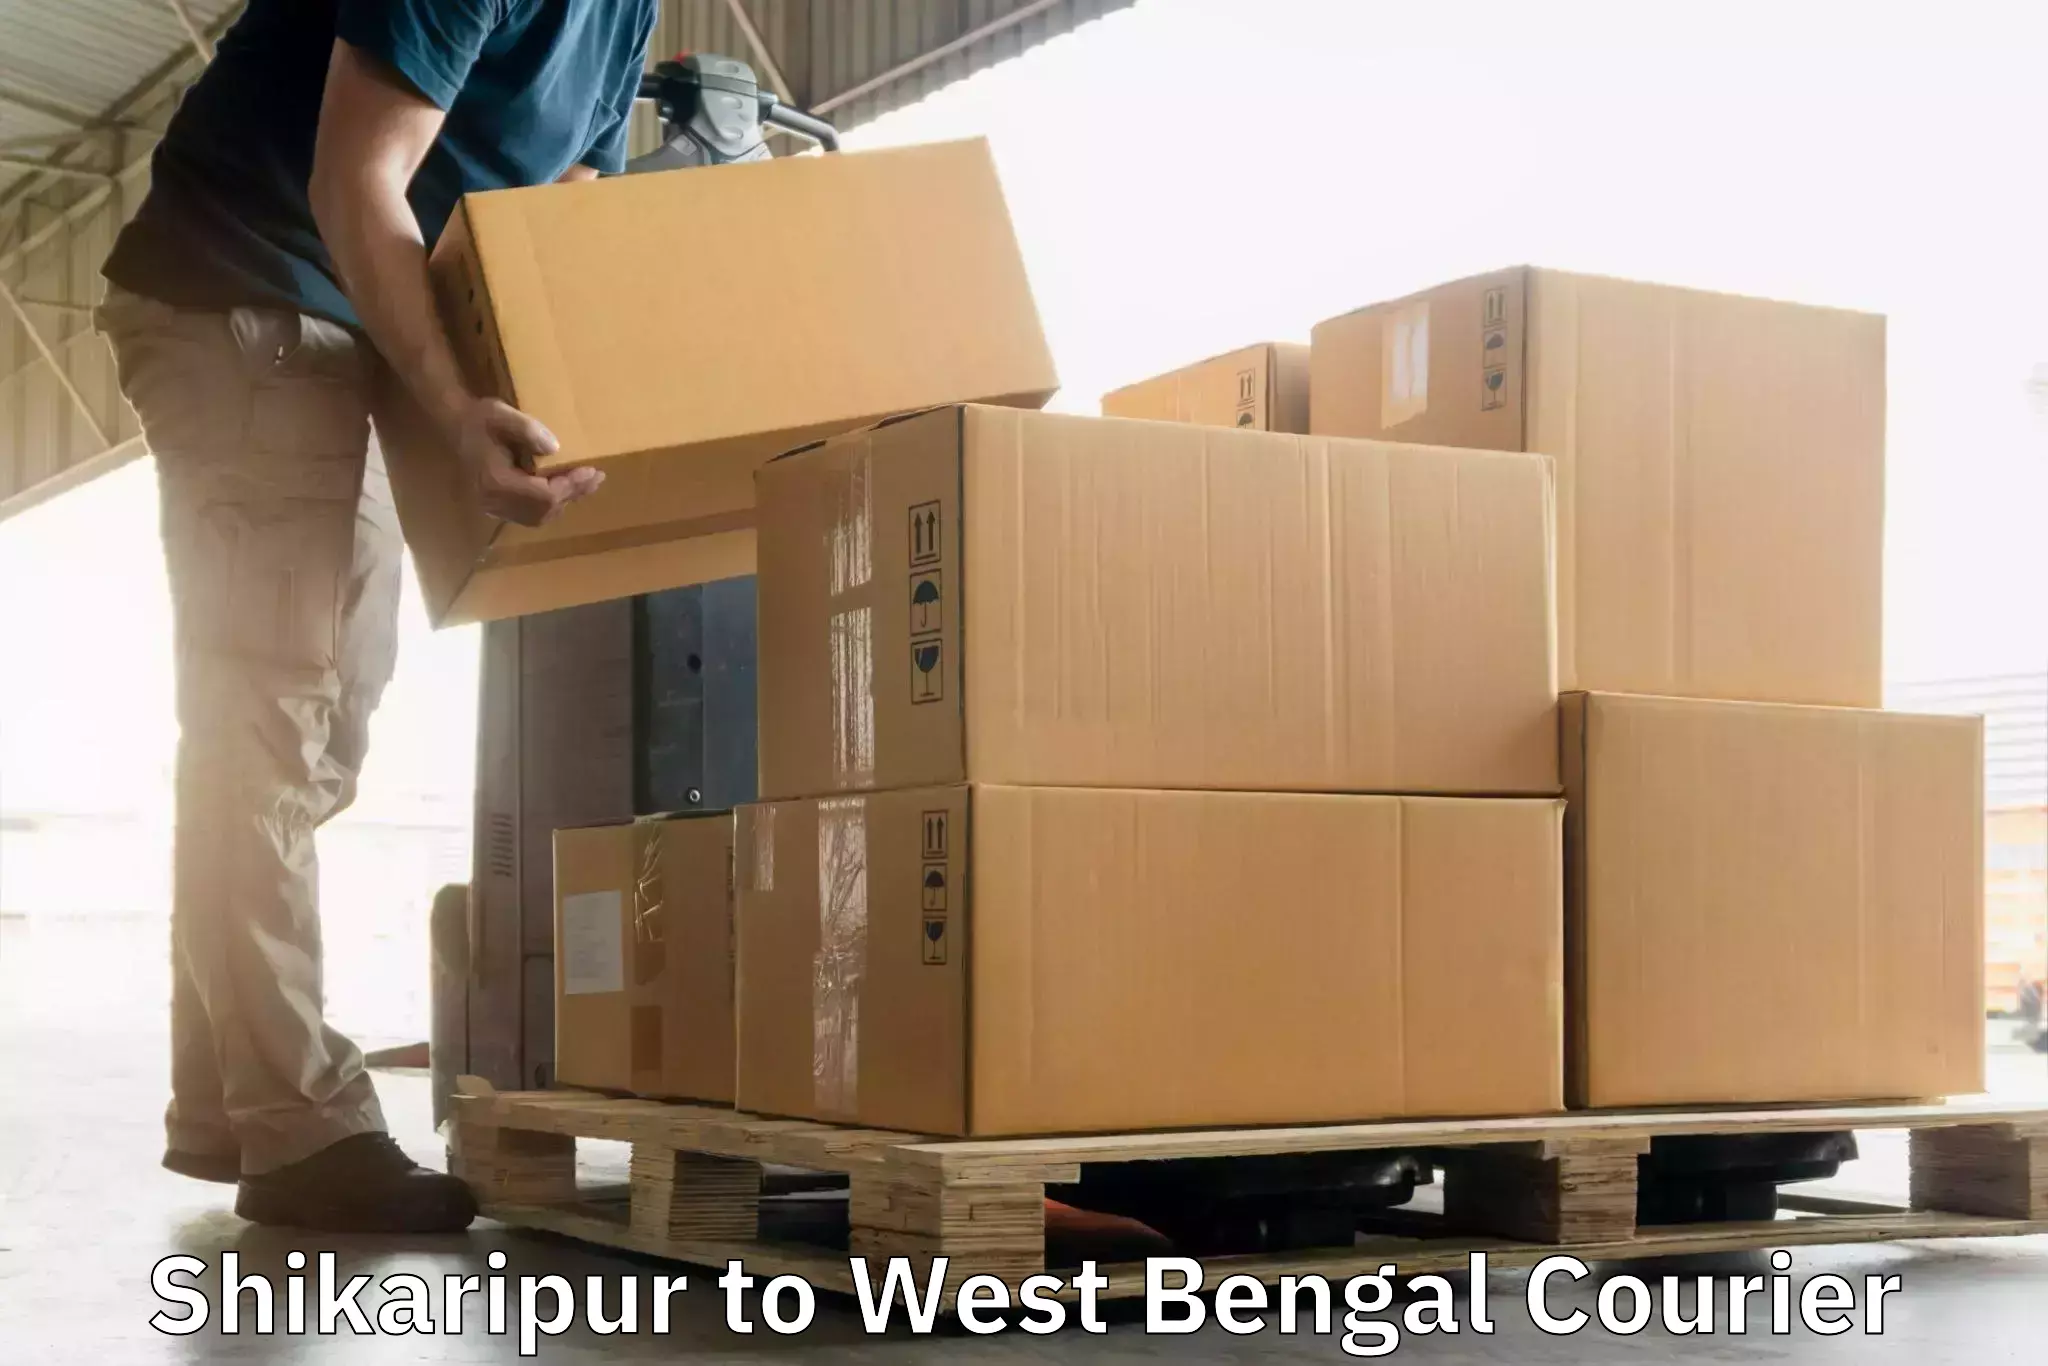 Express mail service in Shikaripur to West Bengal